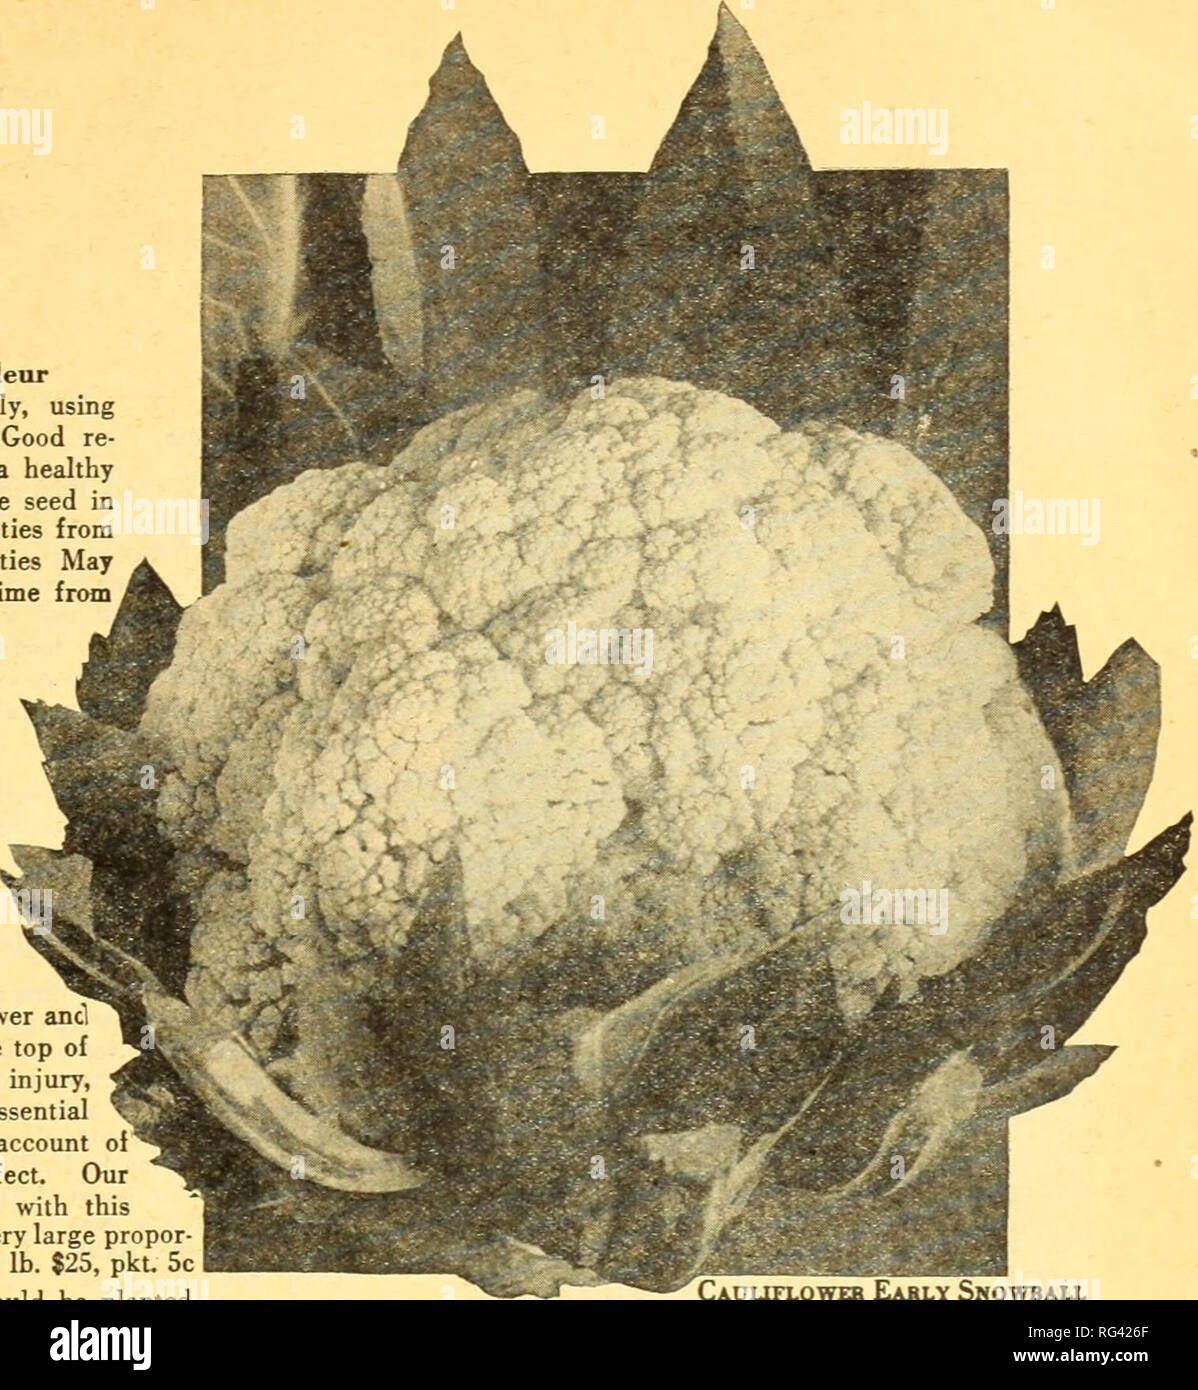 . California gardening. Nurseries (Horticulture) Catalogs; Flowers Seeds Catalogs; Plants, Ornamental Catalogs; Vegetables Seeds Catalogs; Fruit trees Catalogs; Trees Catalogs; Grasses Seeds Catalogs; Gardening Equipment and supplies Catalogs. SEEDS California s Best CAULIFLOWER Note—Prices listed art postpaid. Coliflor Blumenkohl Chou-fleur Culture: Prepare the seed-bed carefully, using only rich and thoroughly pulverized soil. Good re- sults are obtained by keeping the plant in a healthy and rapidly growing condition. Broadcast the seed in the seed-bed prepared, sowing the early varieties fr Stock Photo